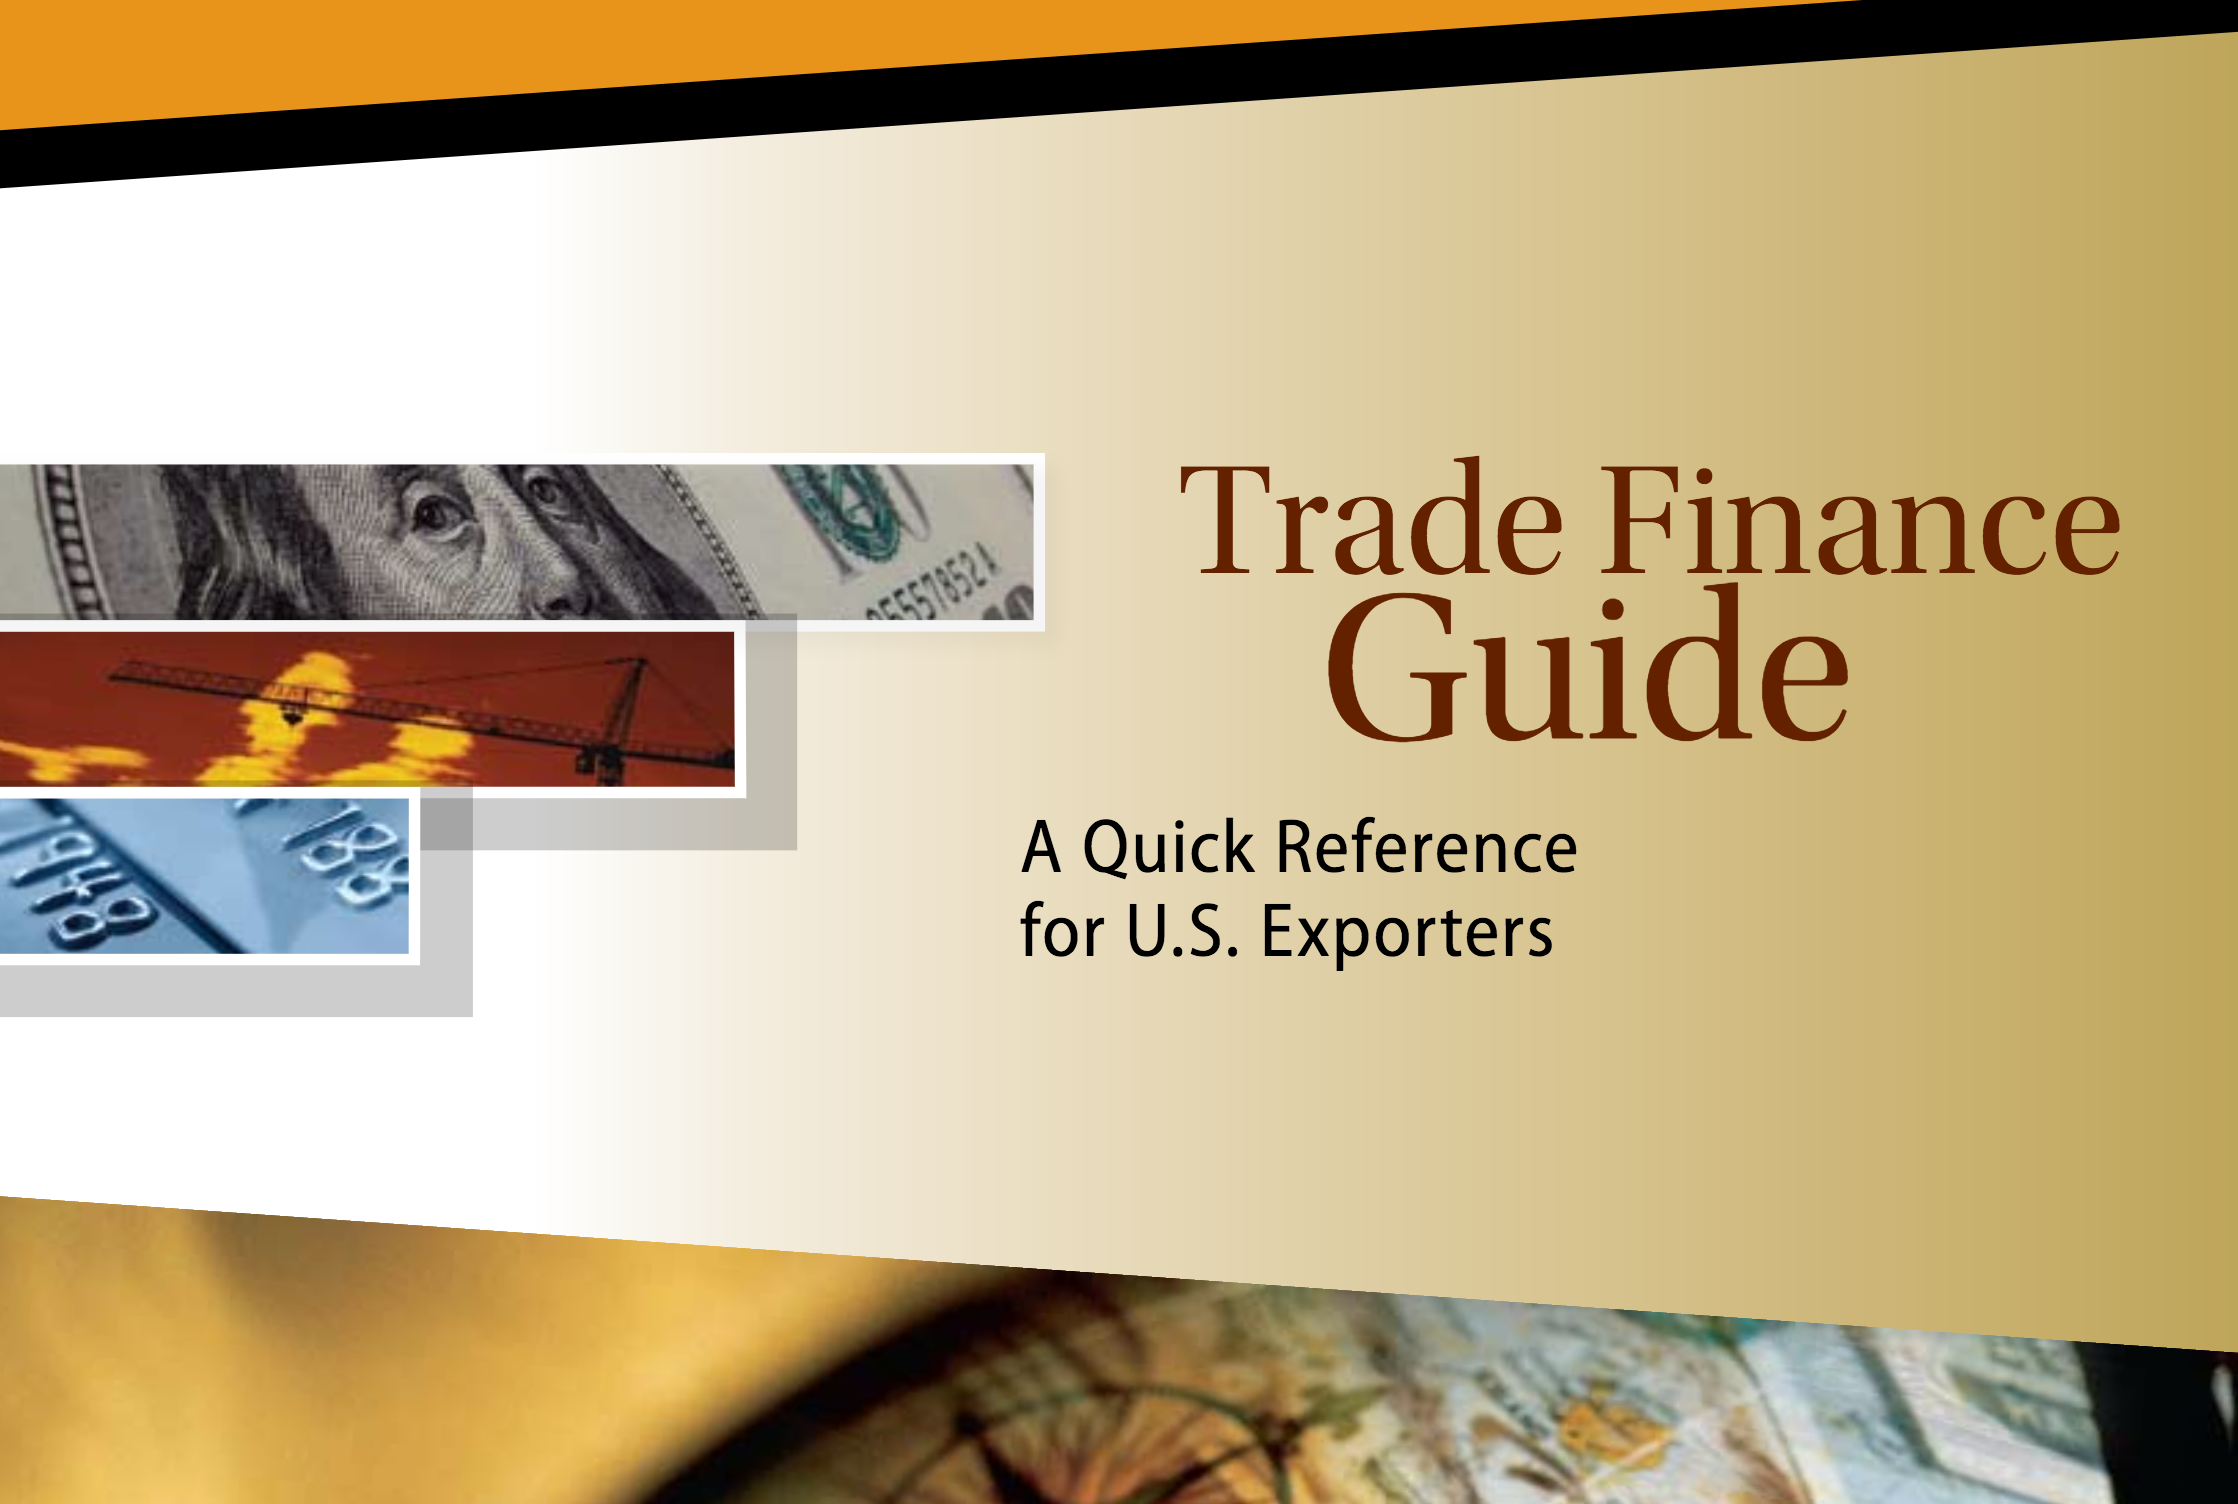 Trade Finance Guide: A Quick Reference for U.S. Exporters